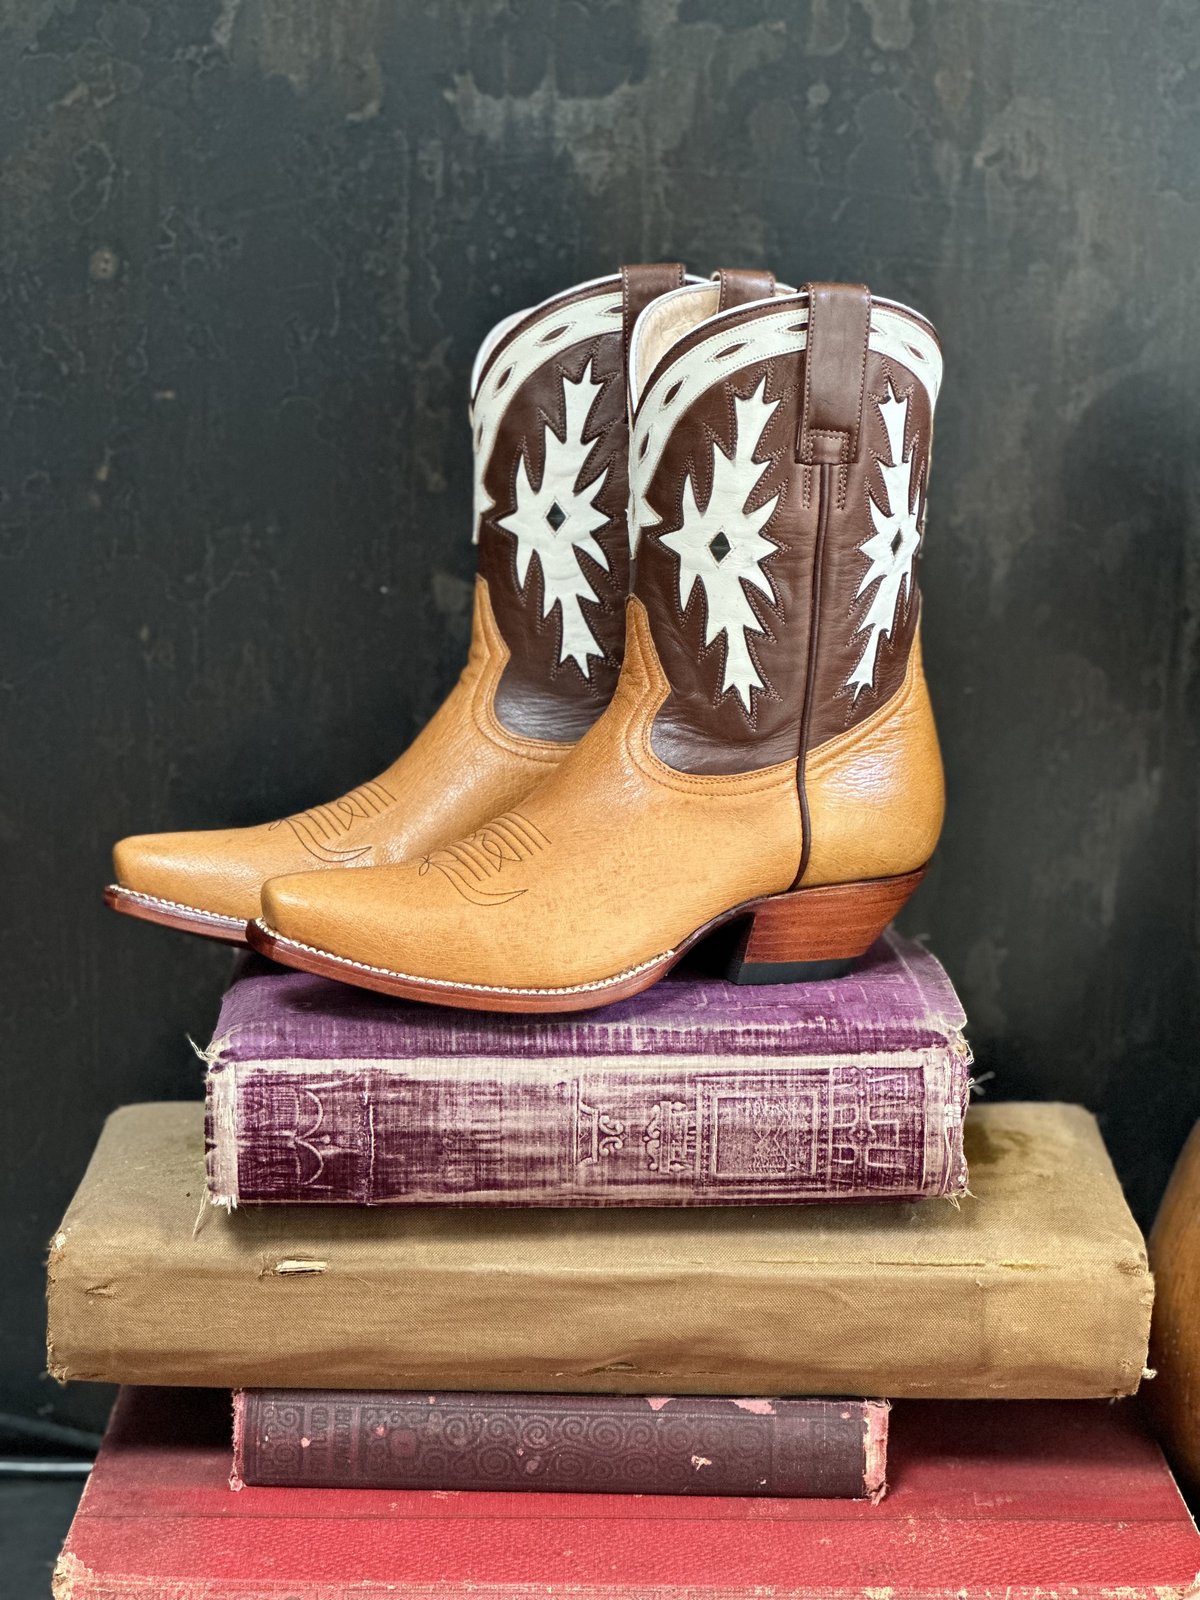 authentic womens cowboy boots